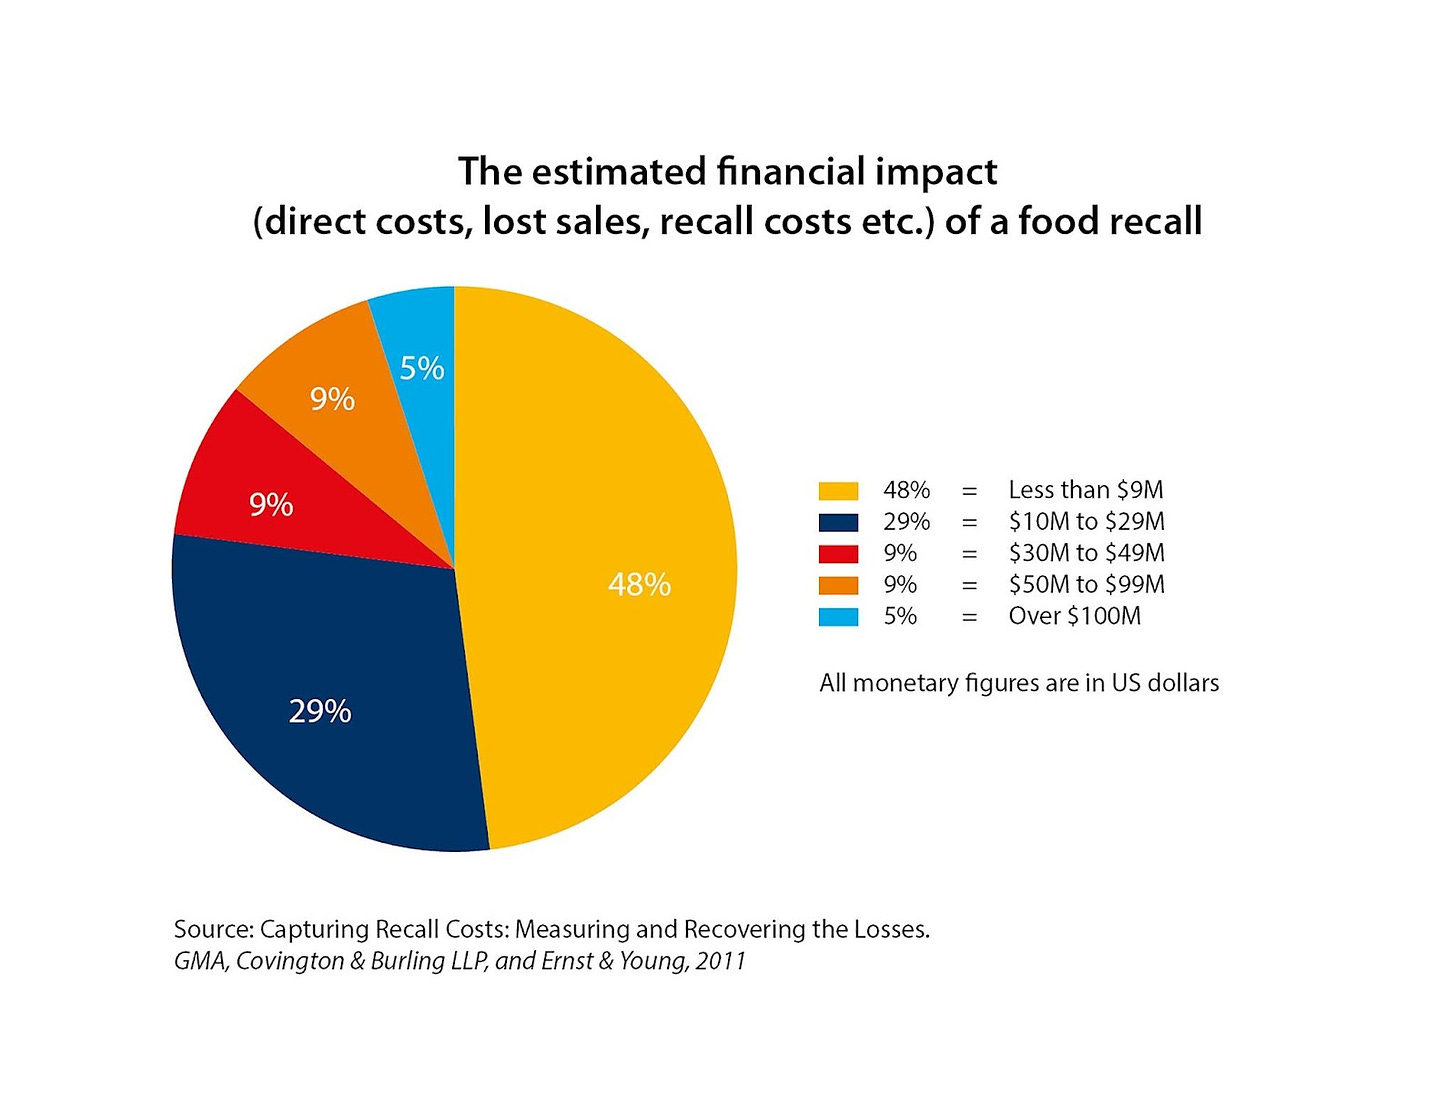 A pie chart breaking down the costs of a recall for food manufacturers. The average cost is $10 million. For 5% of businesses it cost over $100 million.